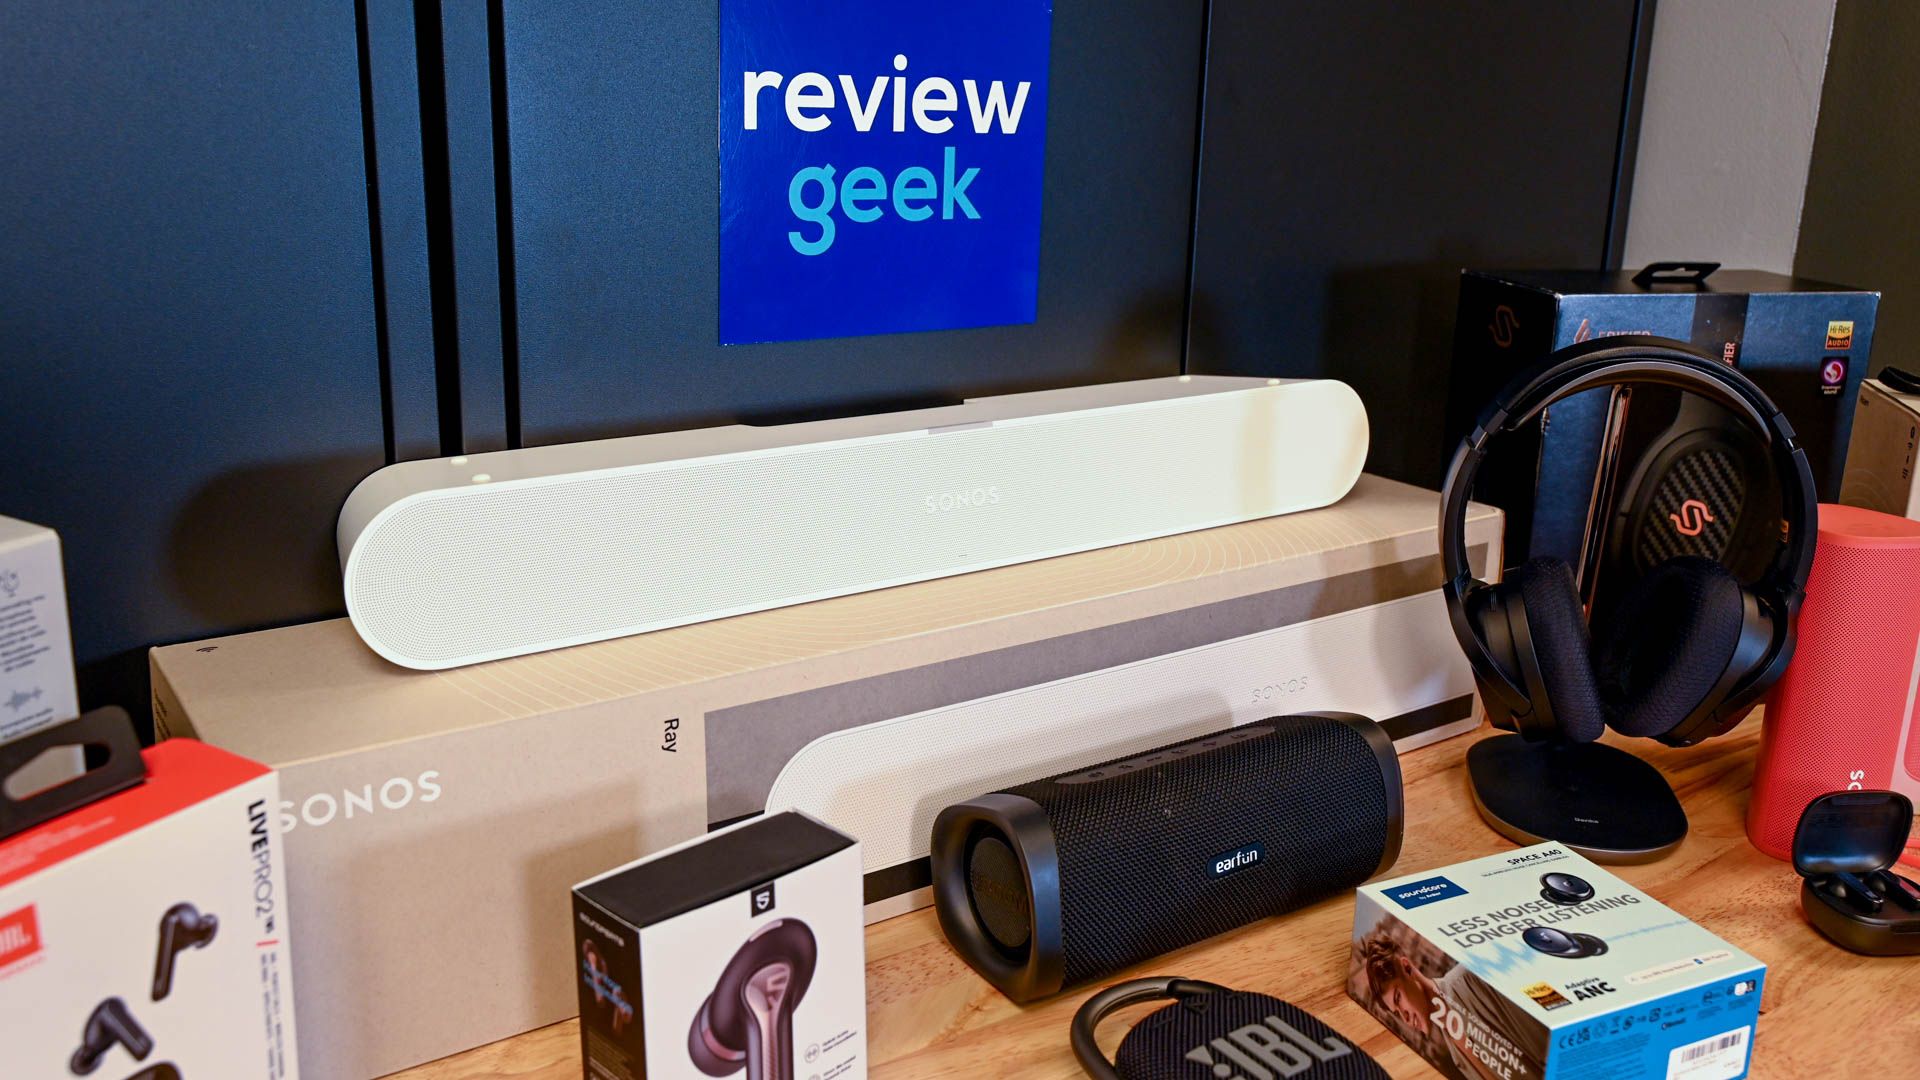 Collection of audio products, including soundbars and earbuds, with the Review Geek logo.